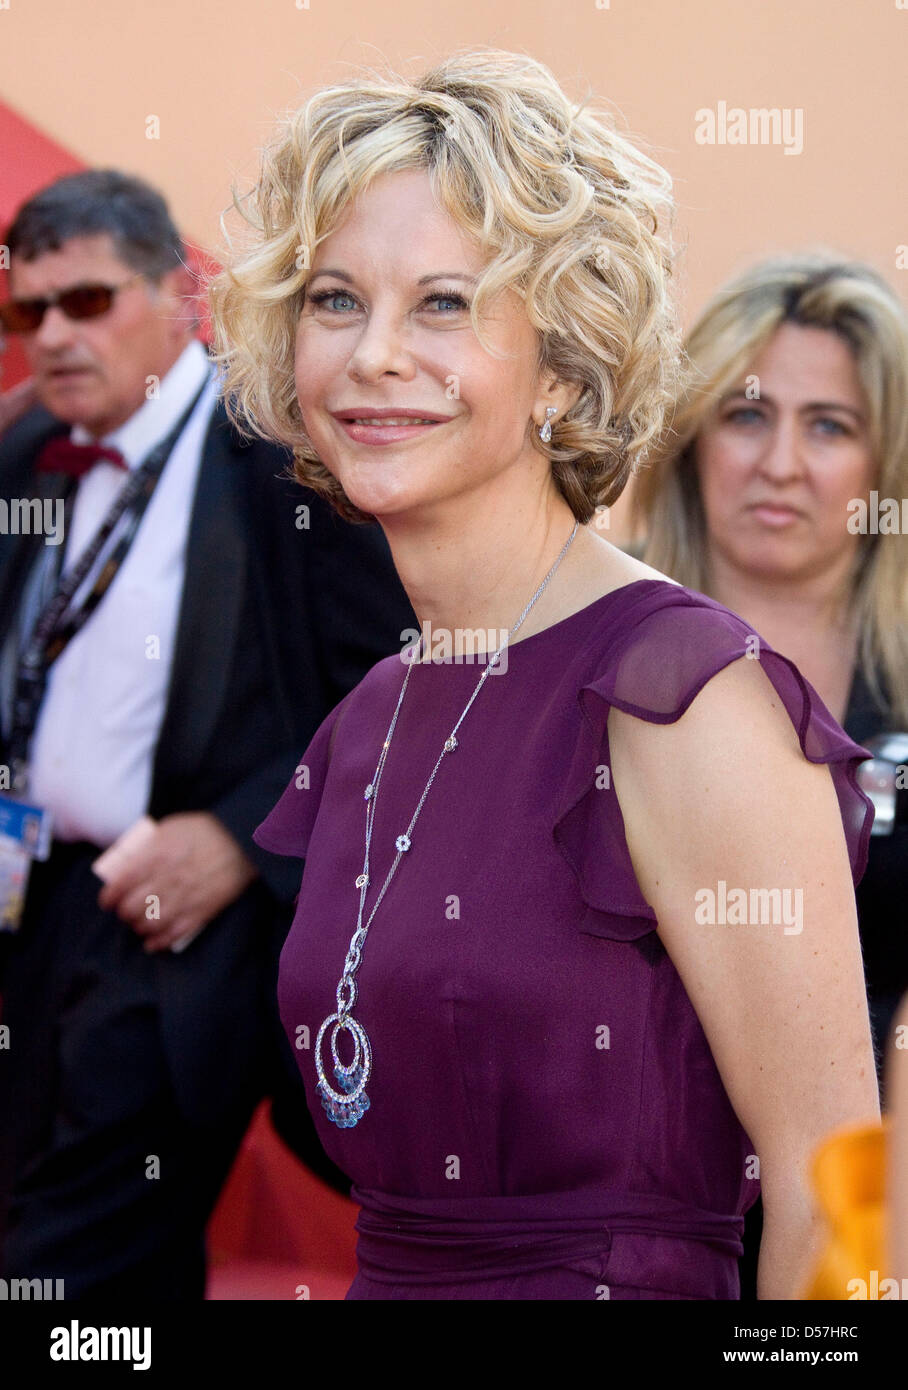 US actress Meg Ryan arrives for the screening of the movie 'Biutiful' at the 63rd Cannes Film Festival in Cannes, France, 17 May 2010. The movie is presented in competition at the Cannes Film Festival 2010, running from 12 to 23 May 2010. Photo: Hubert Boesl Stock Photo